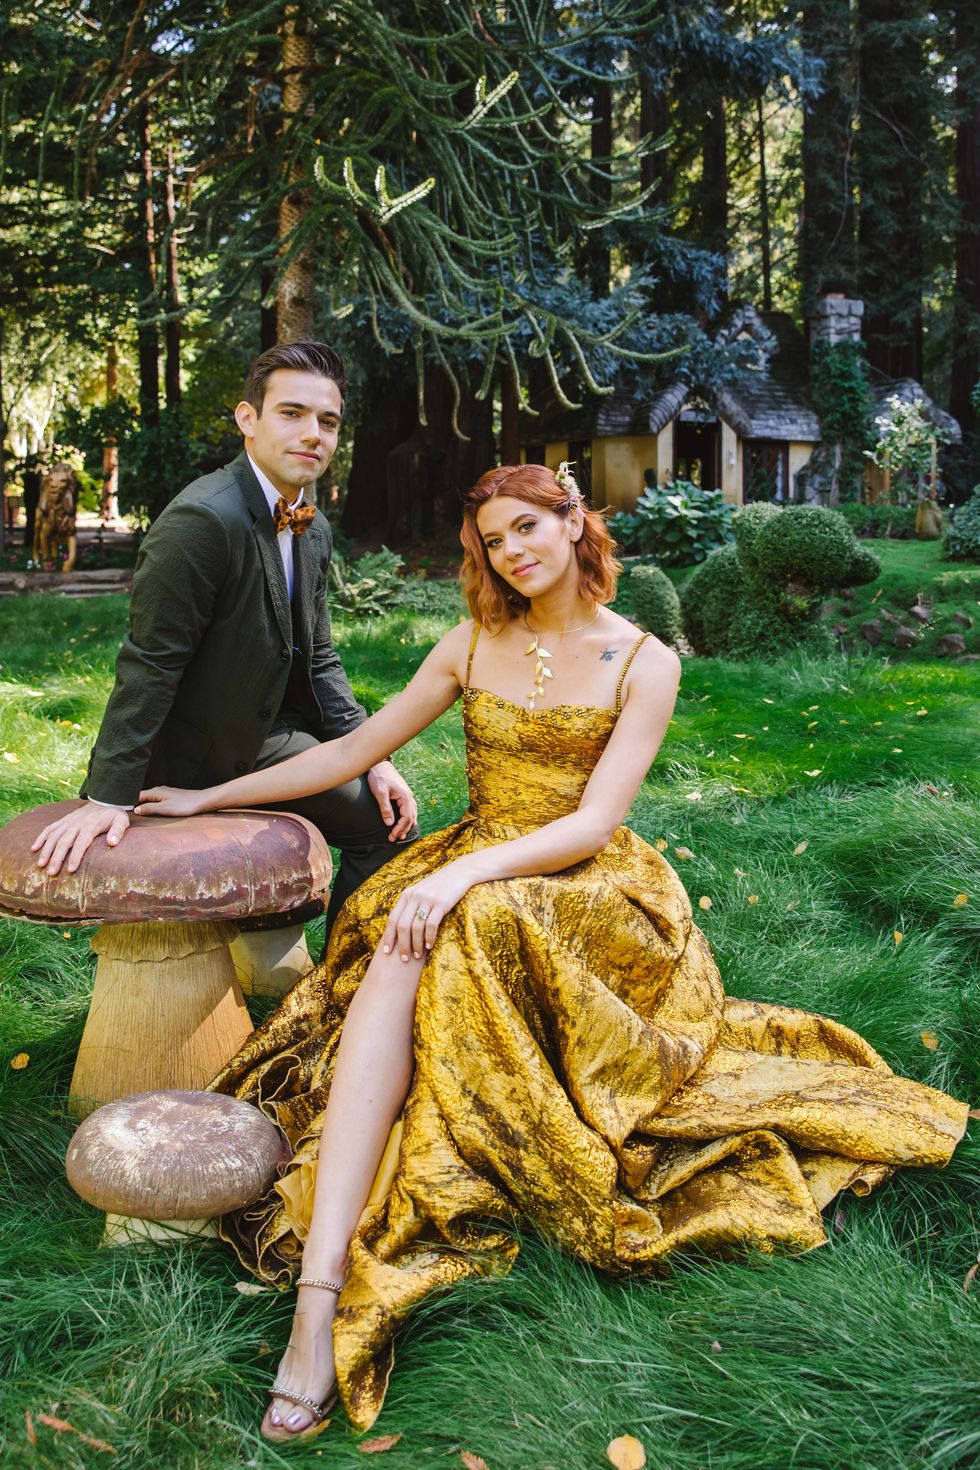 a man and woman sitting on a stump in a yard with trees